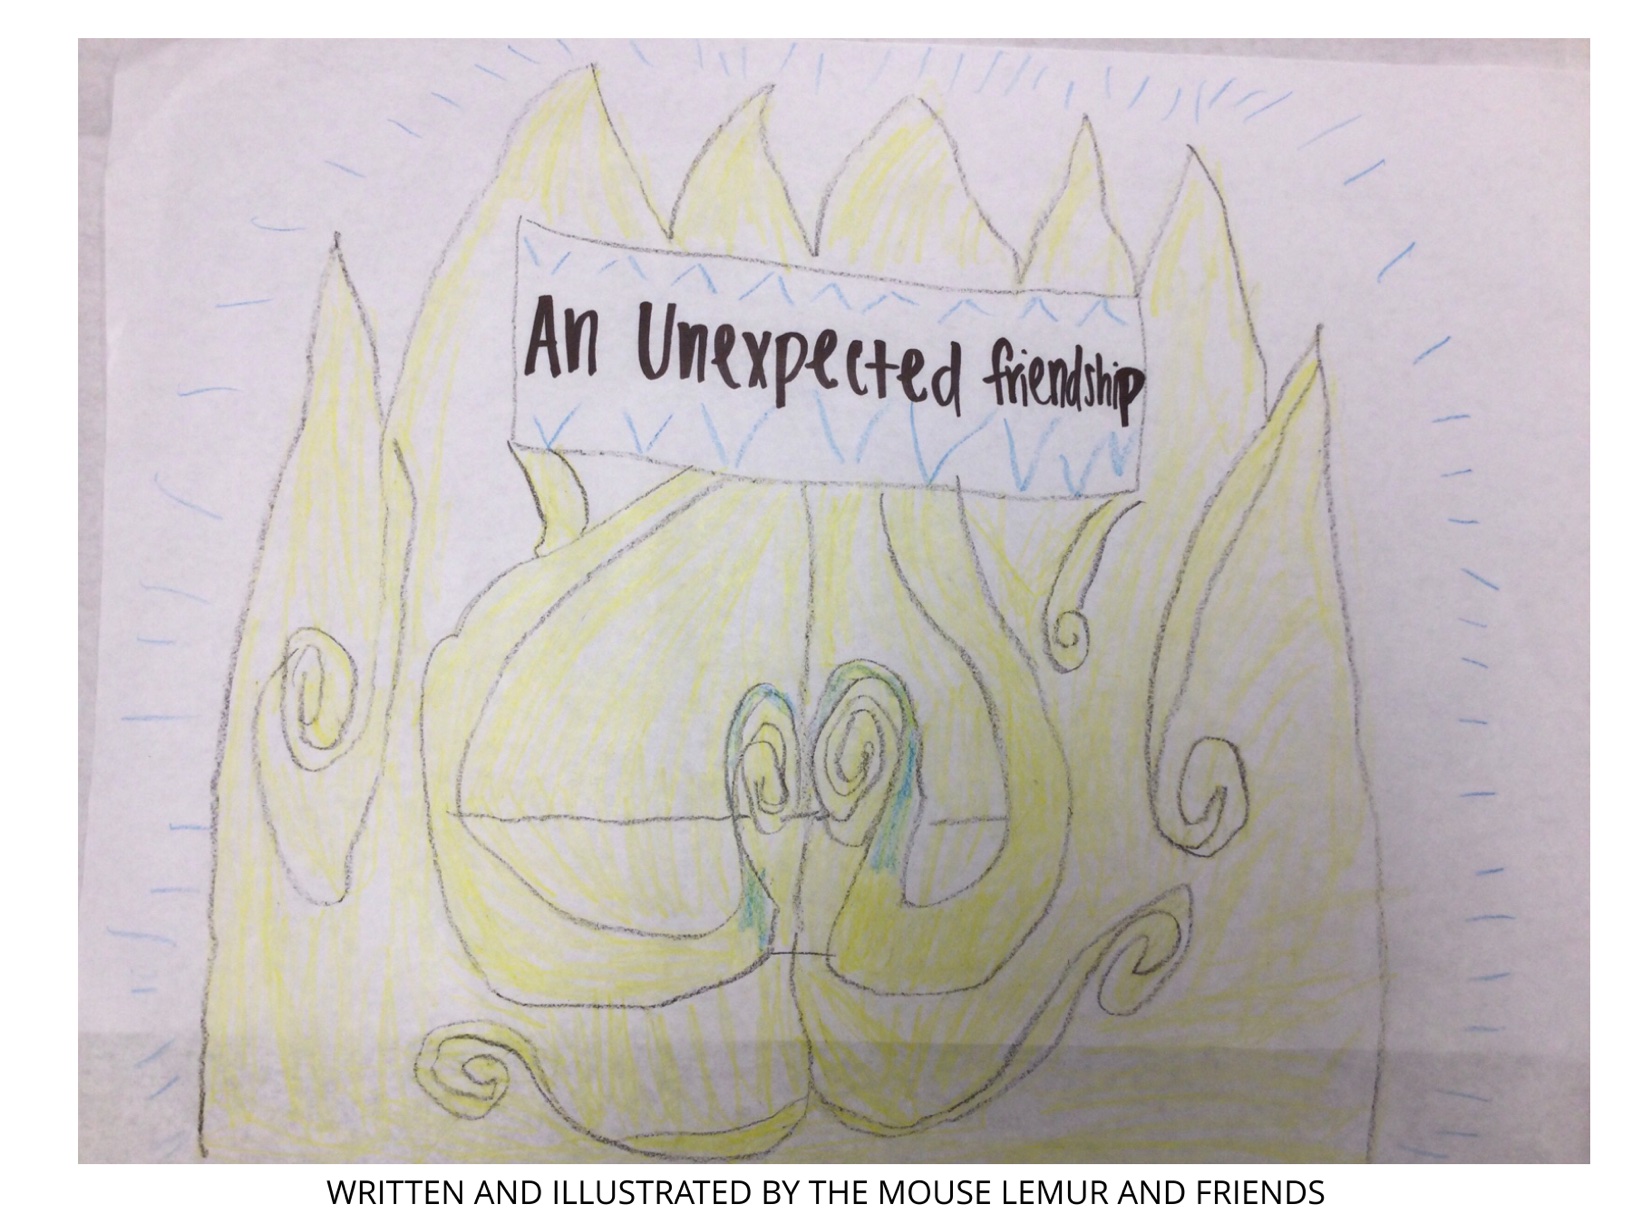 An Unexpected Friendship by Millbrae – June 21 – 1st Grade